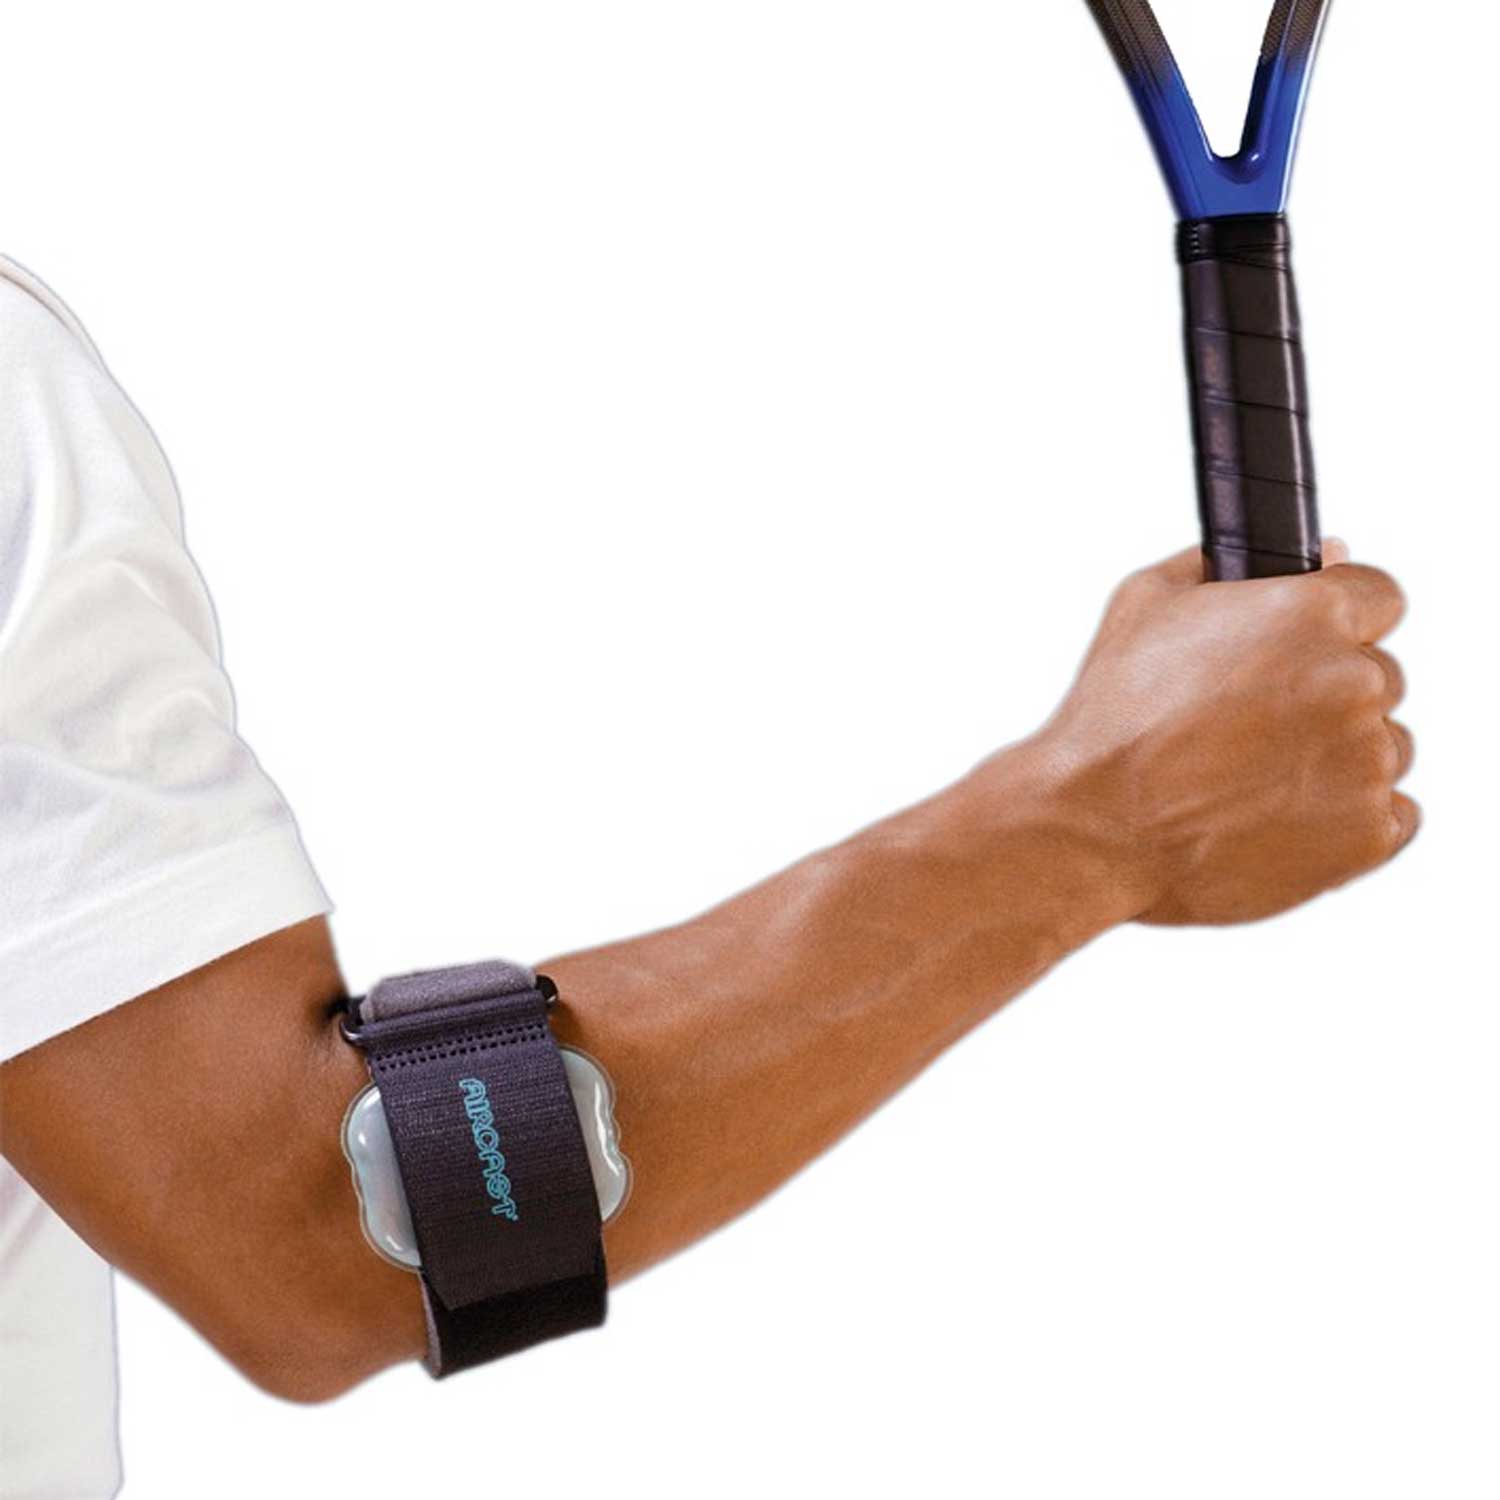 Aircast pneumatic armband tennis elbow support brace